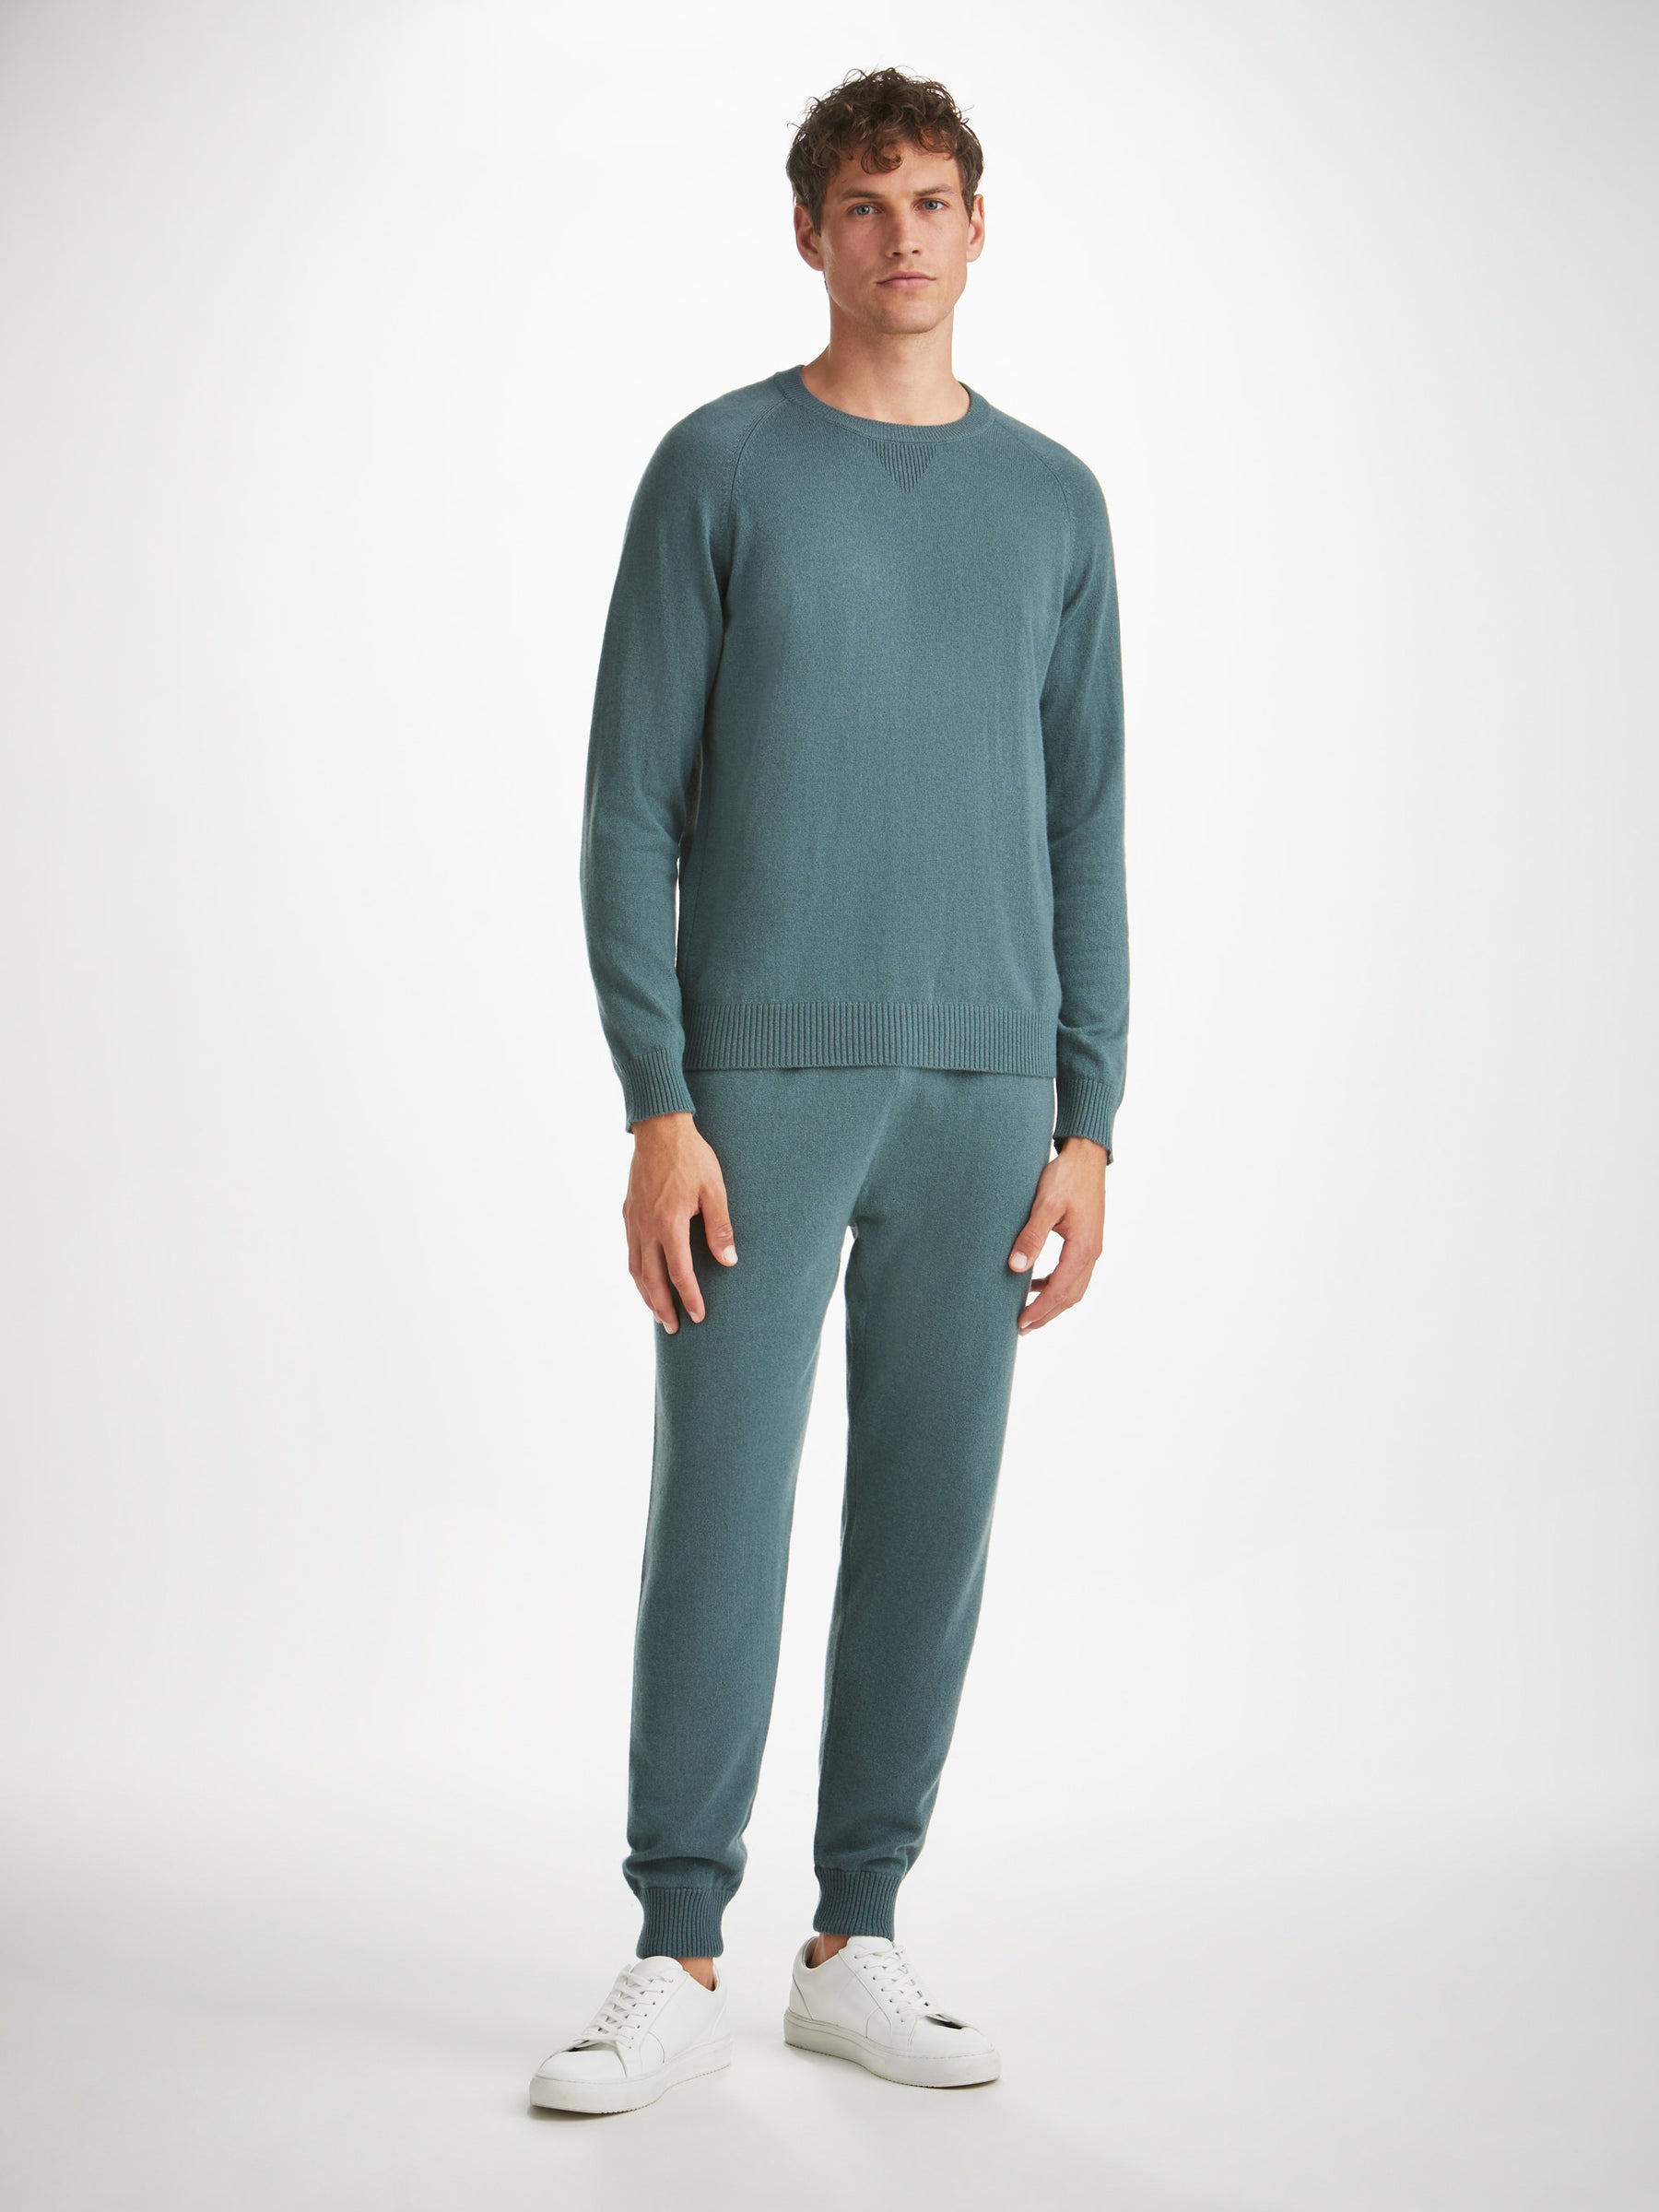 Men's Sweater Finley Cashmere Teal